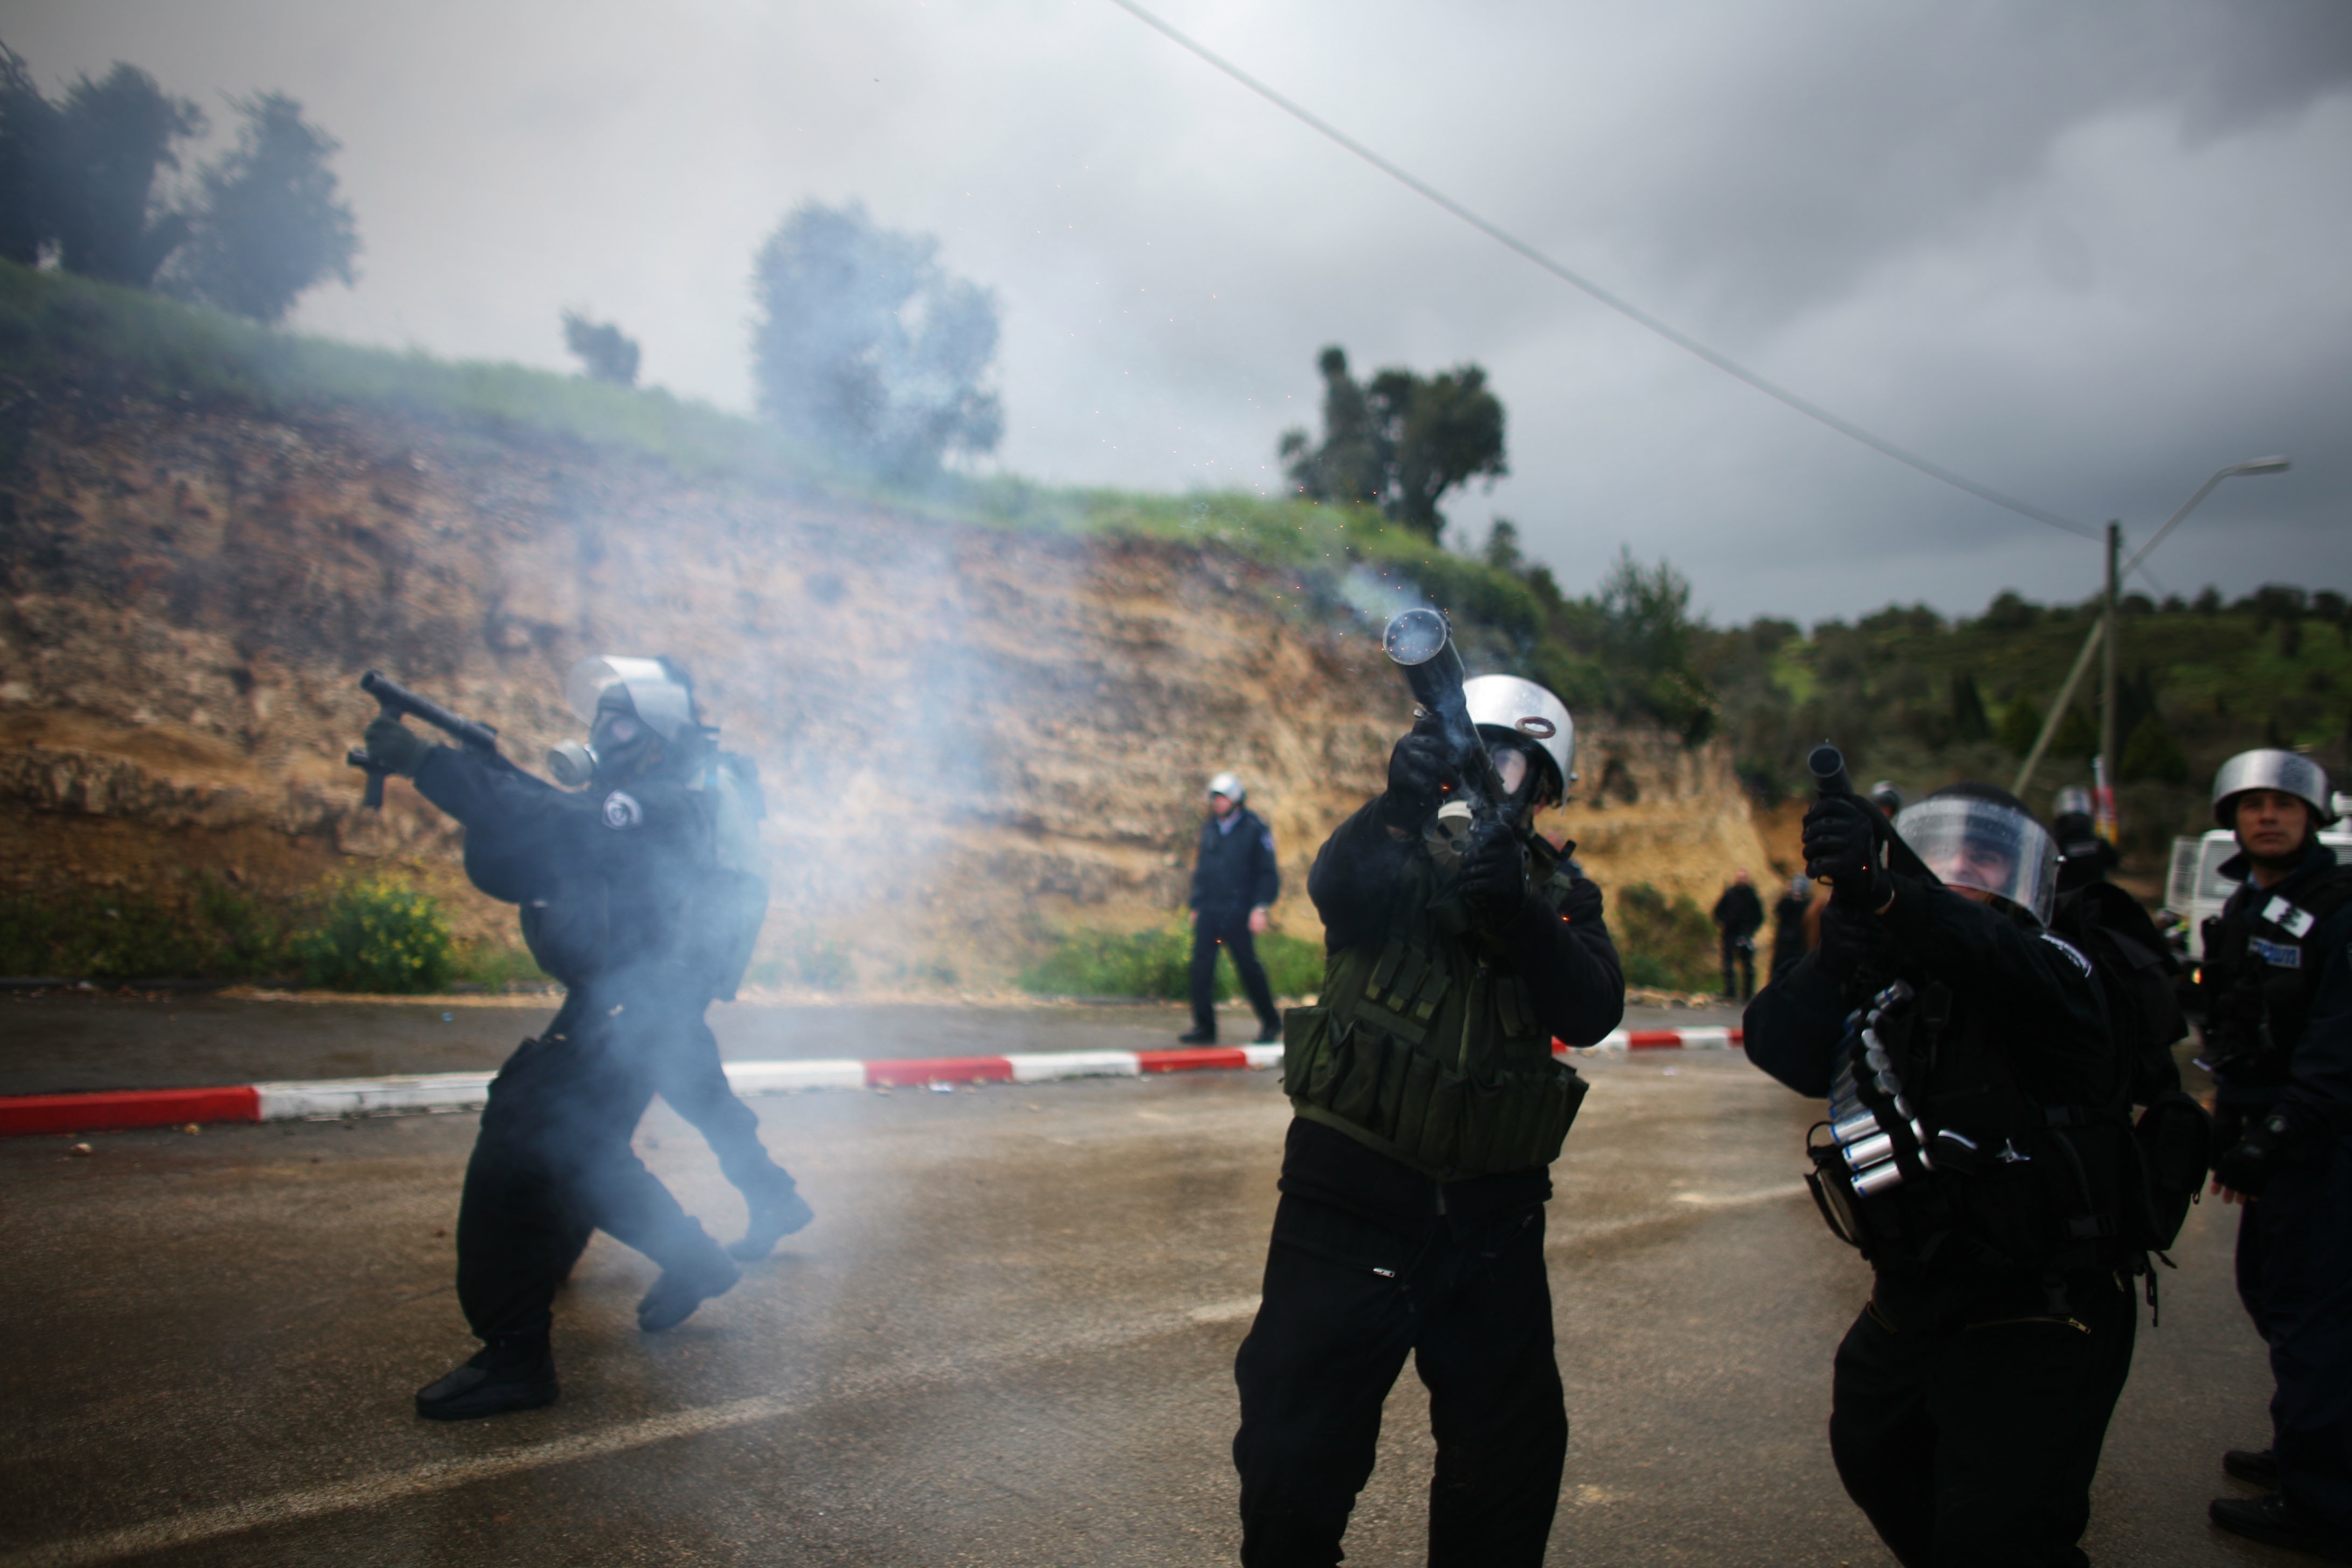 Uriel Sinai/Getty Images. Israeli police shoot tear gas as they clash with local Arabs after a provocative march of flags by right-wing Israelis descended into violence, on March 24, 2009 in Umm al-Fahm in northern Israel.